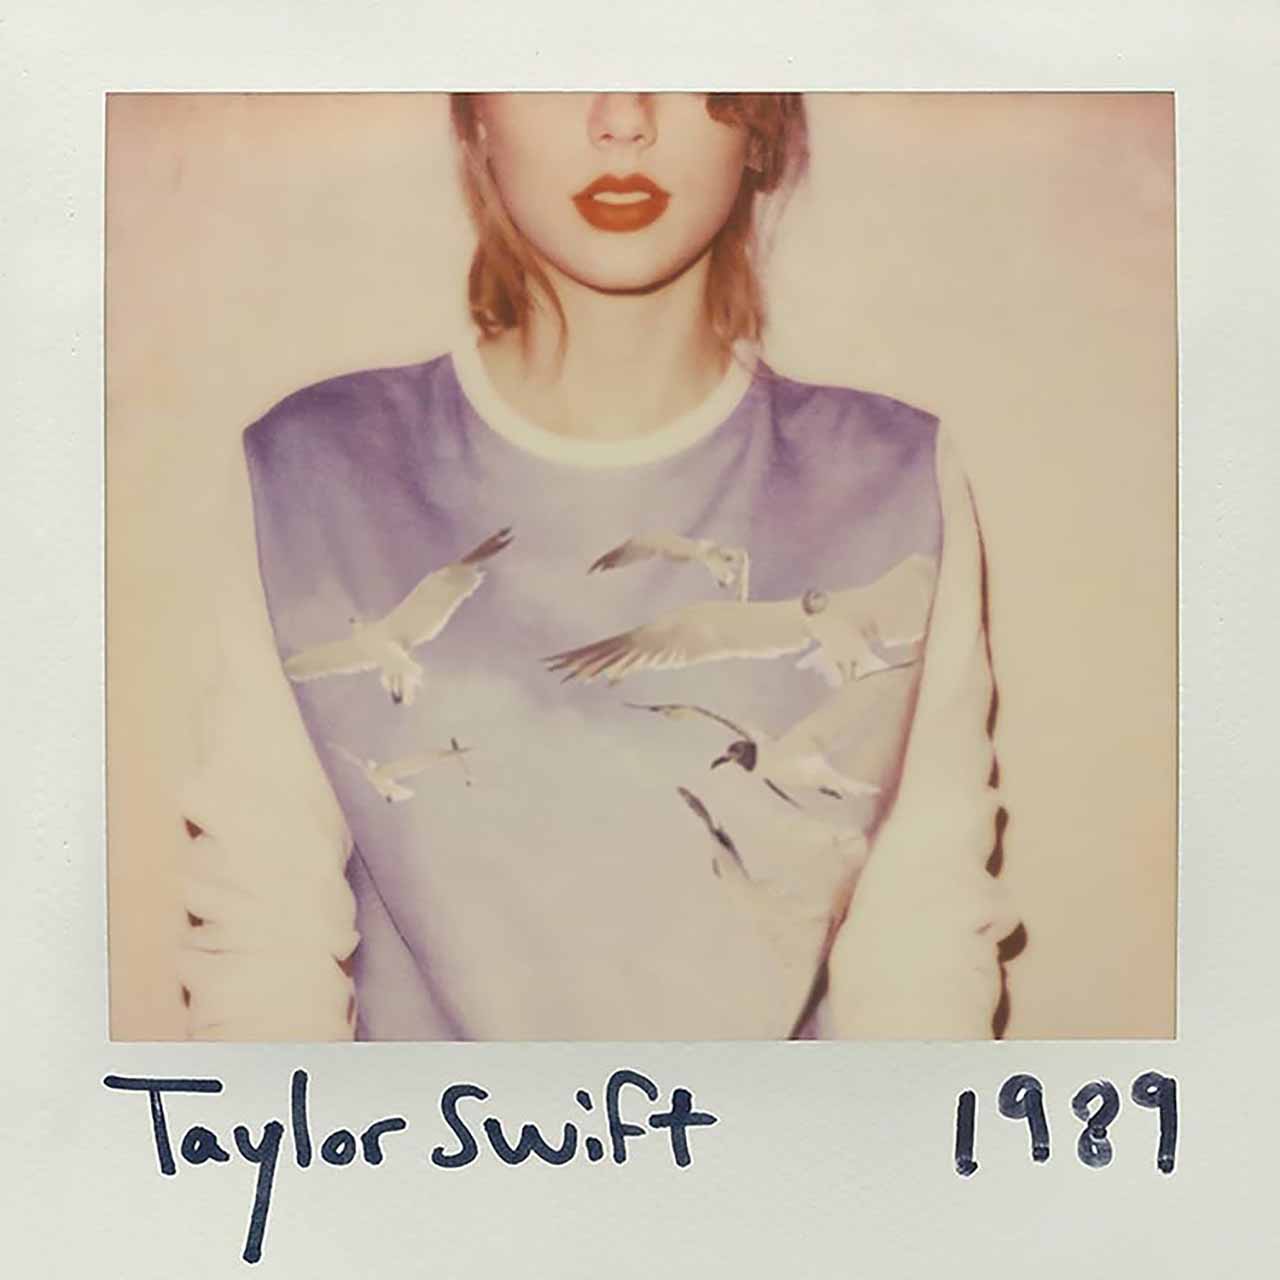 ‘1989’: How Taylor Swift Shook Off Her Past And Hit New Peaks Of Artistry